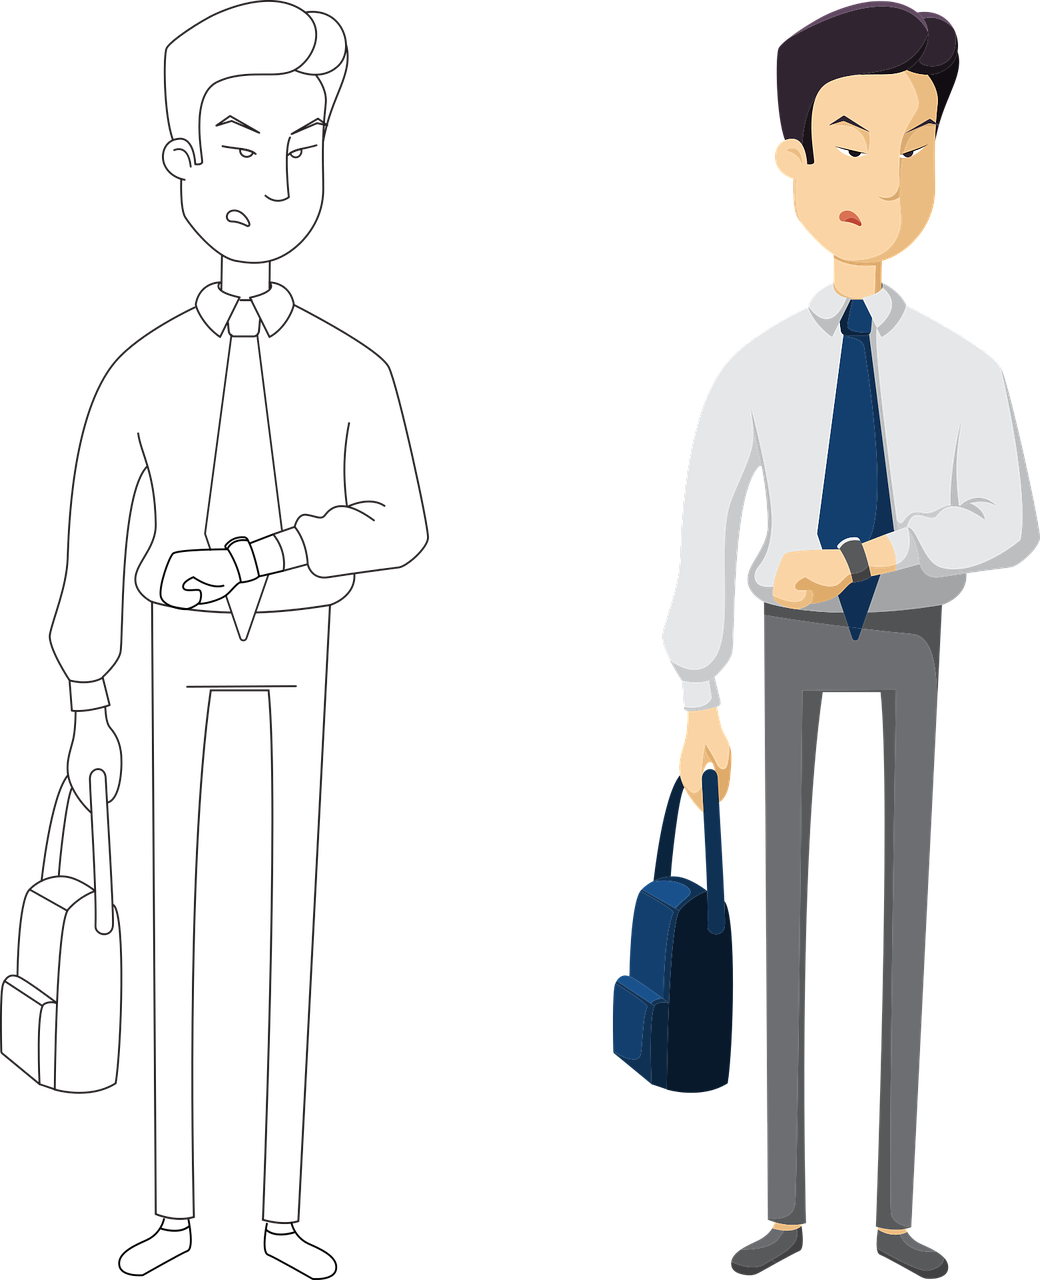 See Businessperson Workers Time Free Transparent Image HQ PNG Image